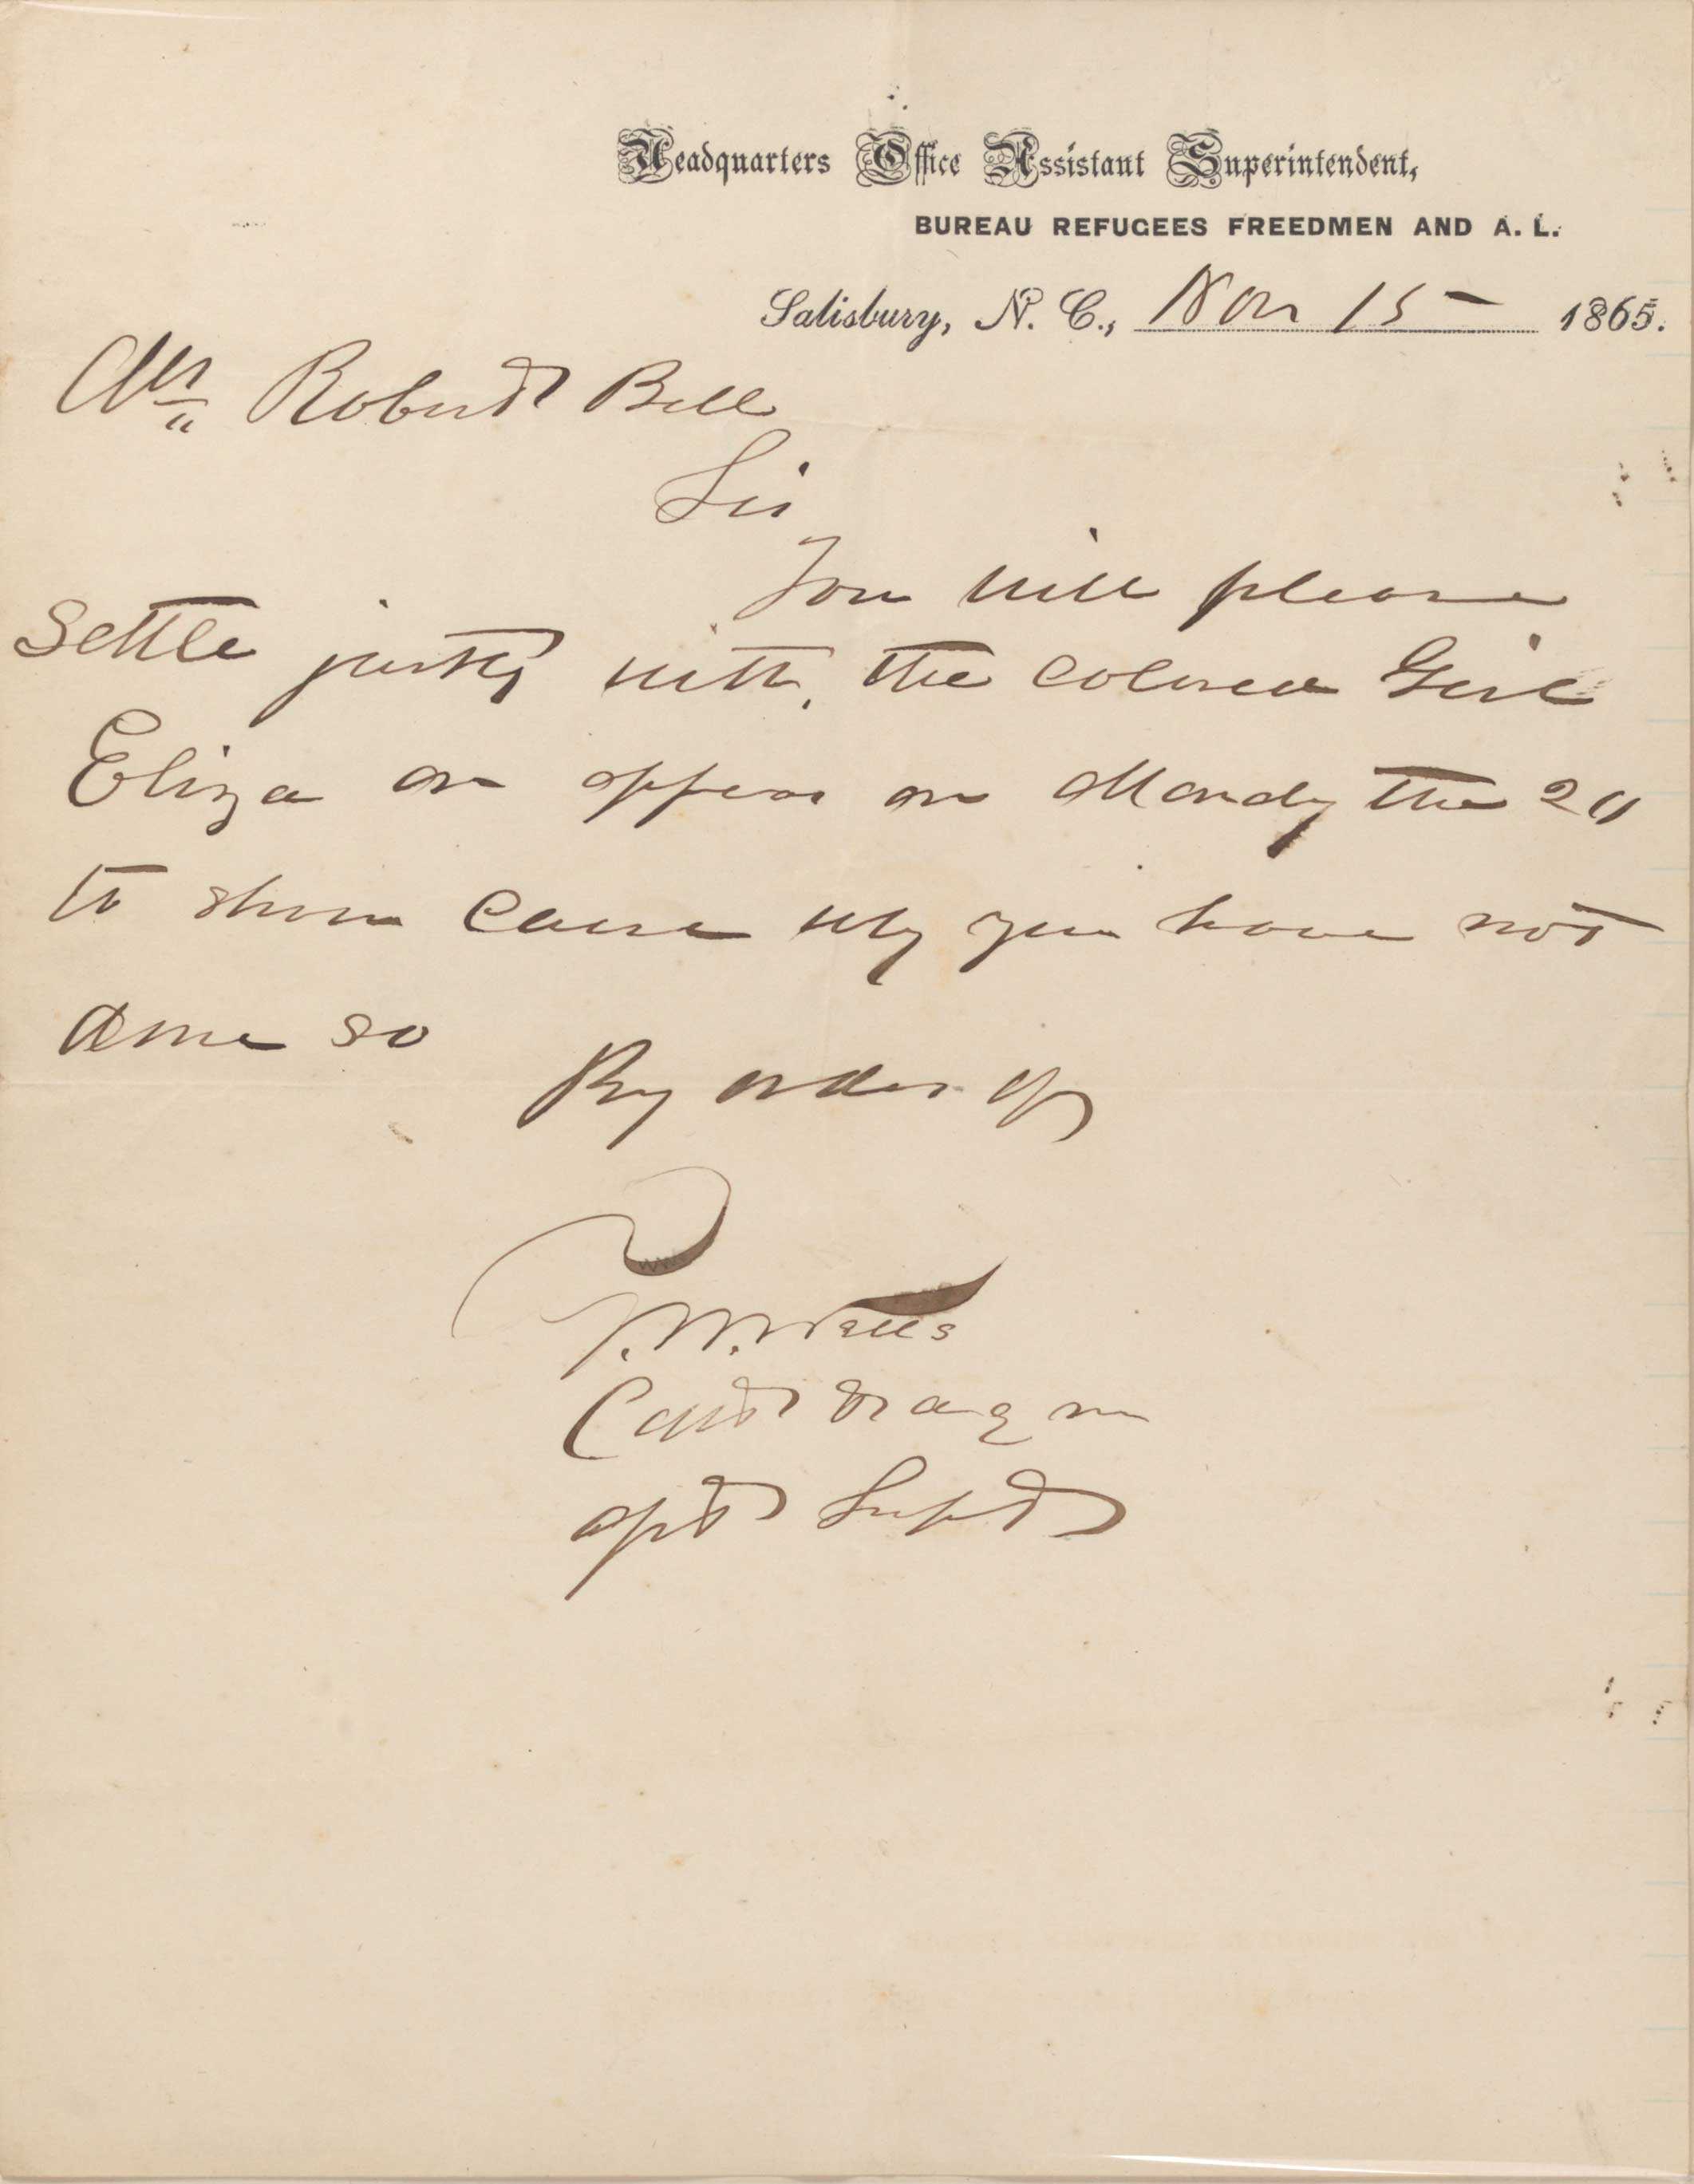 Handwritten letter to Robert Bell from the Freedmen's bureau about a dispute with a woman named Eliza.